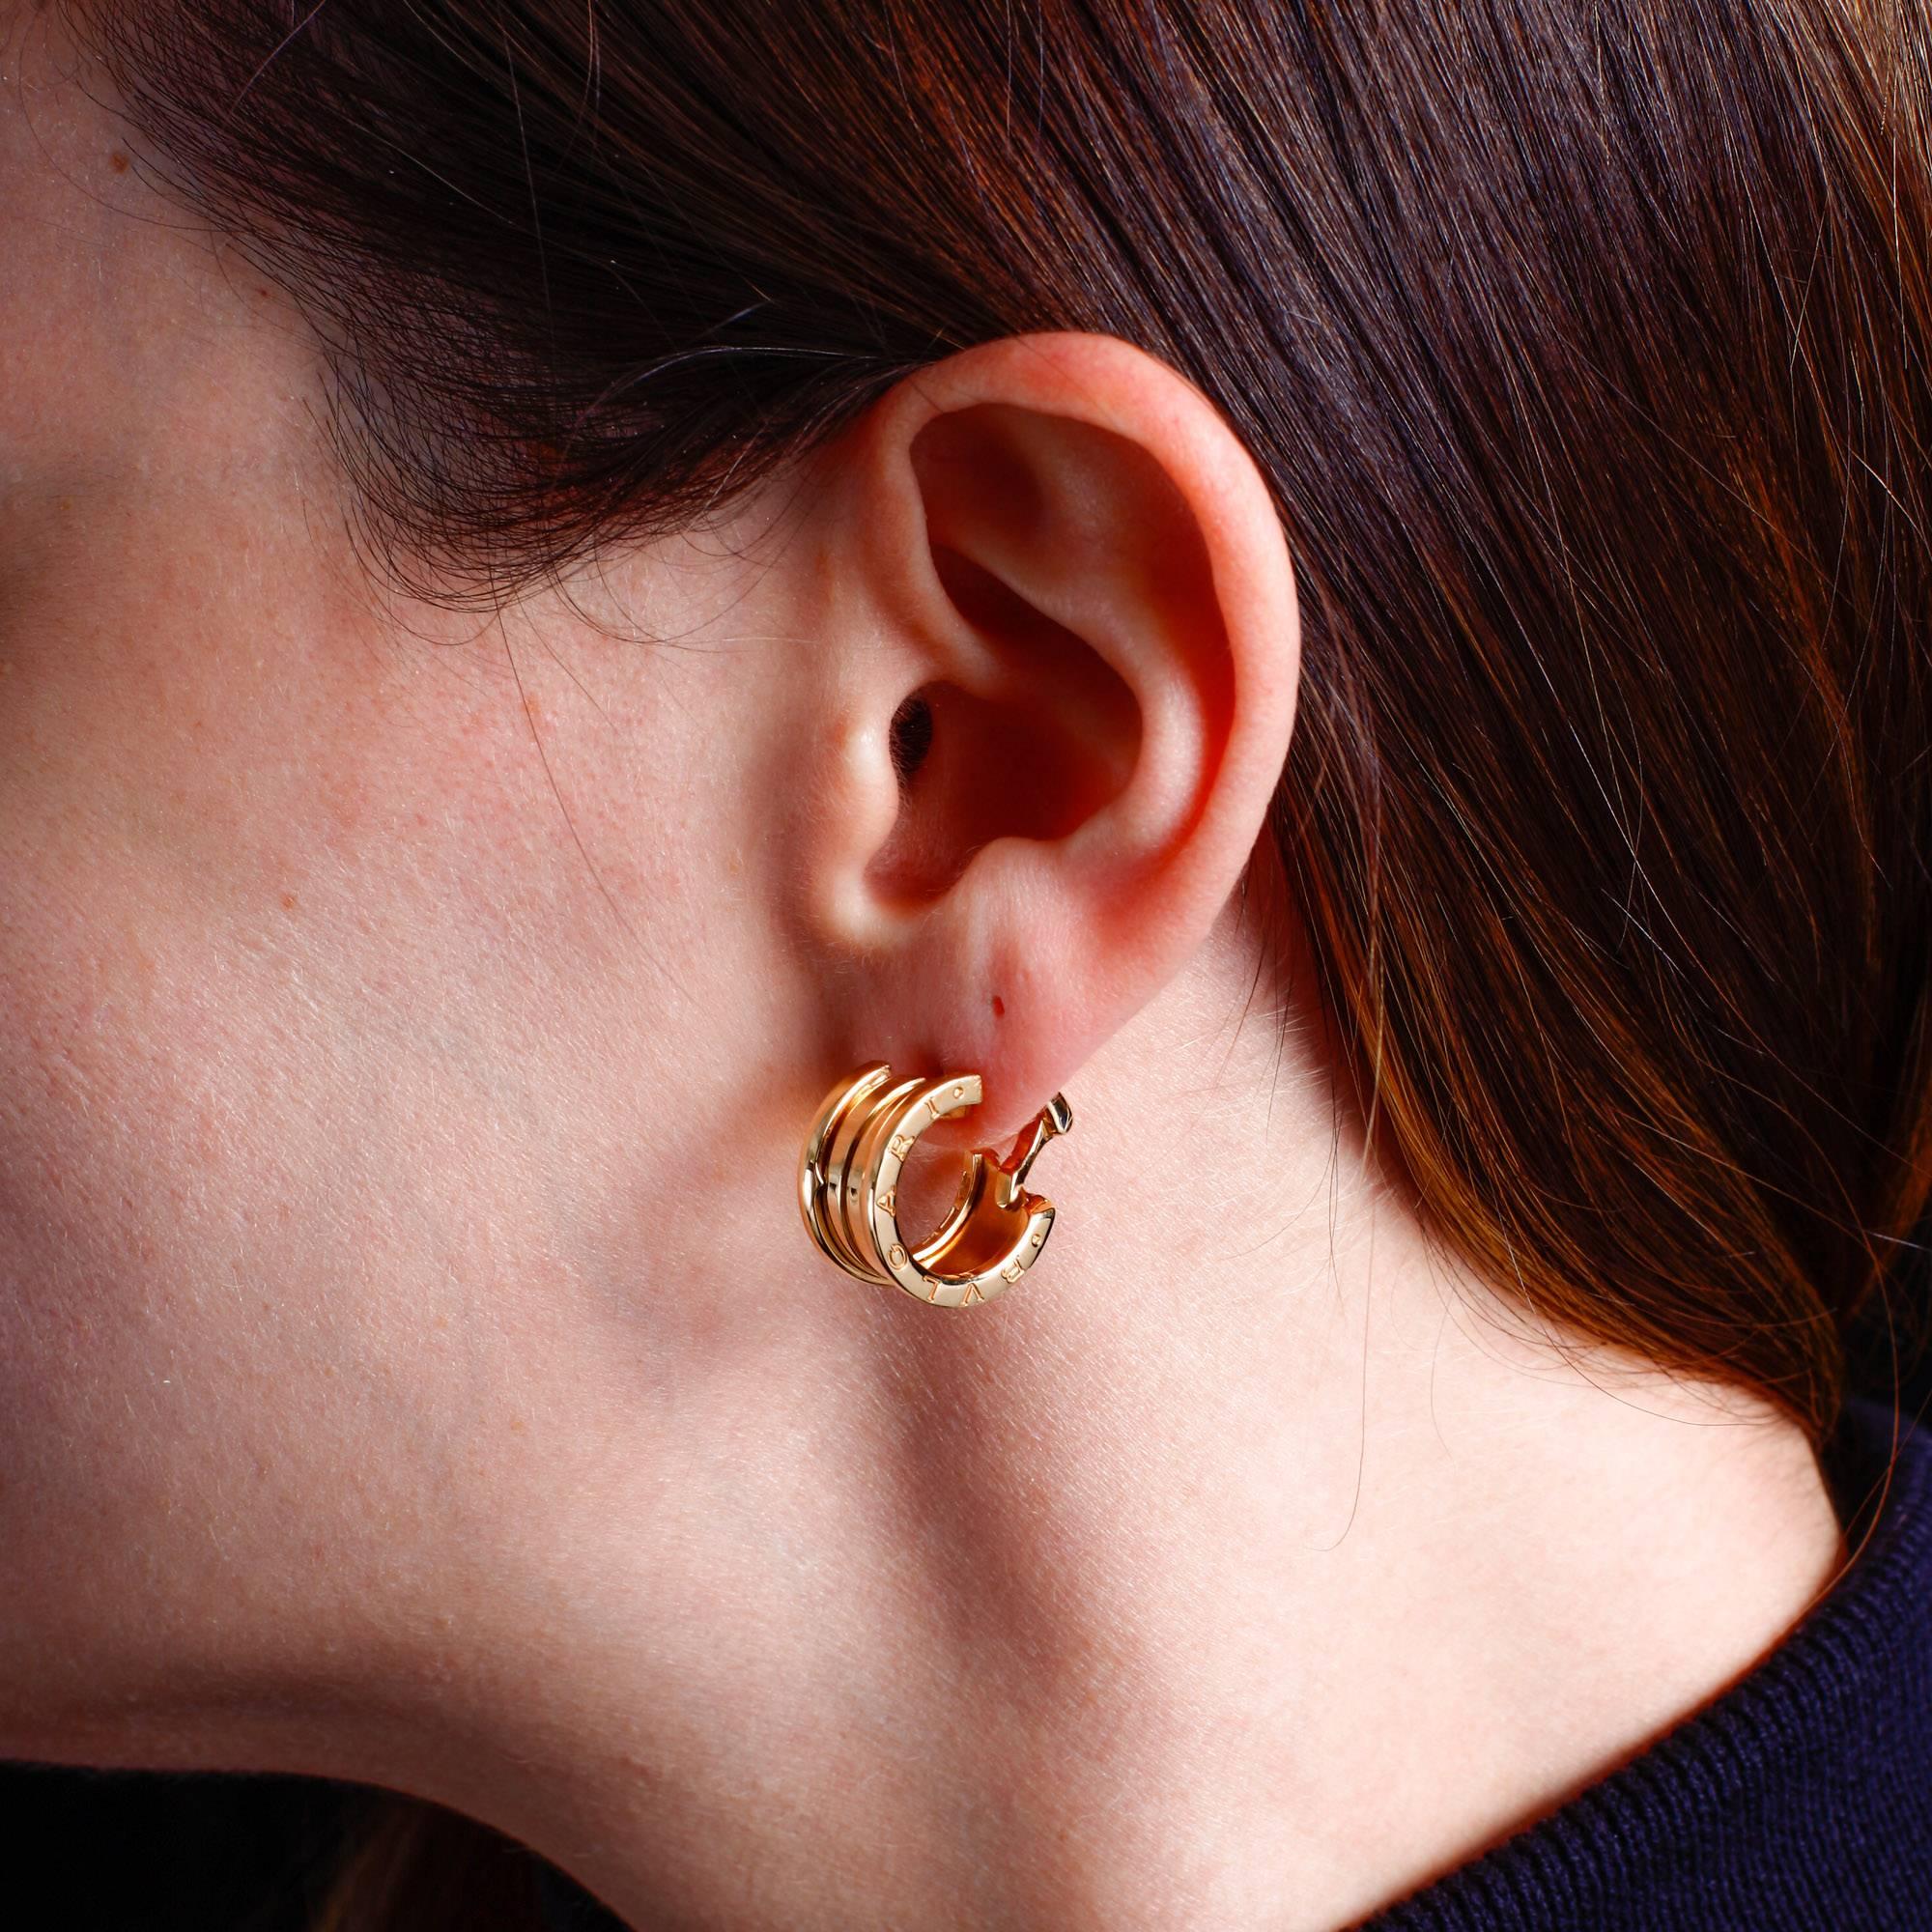 Inspired by the Colosseum in Rome, these 18k yellow gold Bulgari B.zero1 earrings for pierced ears represent both the eternal city and modern Italian design. The earrings are in new condition and would make a perfect gift.

Reference number: